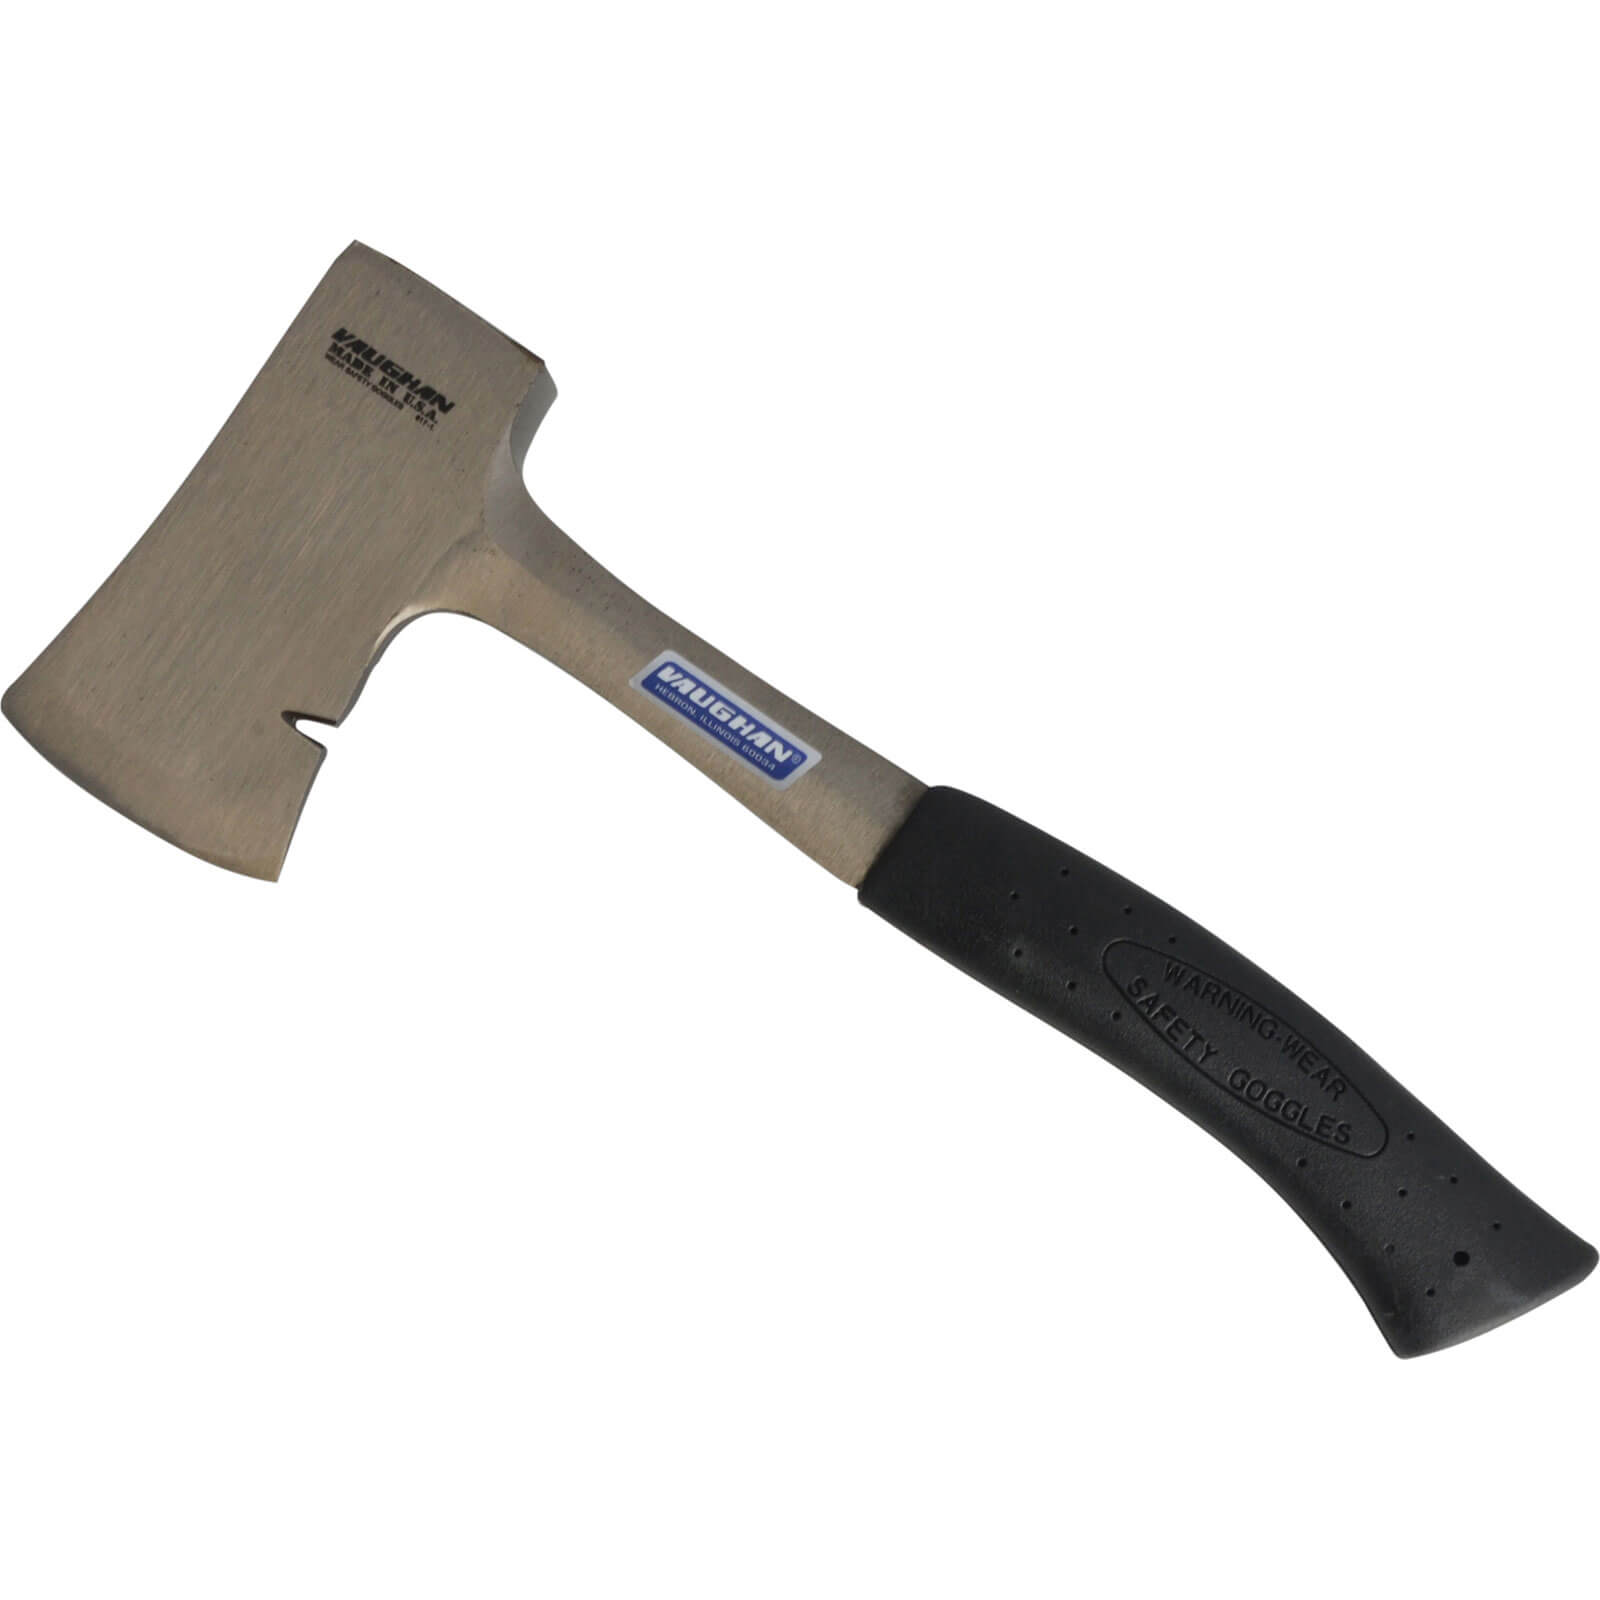 Vaughan AS114 Steel Camping Axe with Sheath 567g / 1 1/4lb